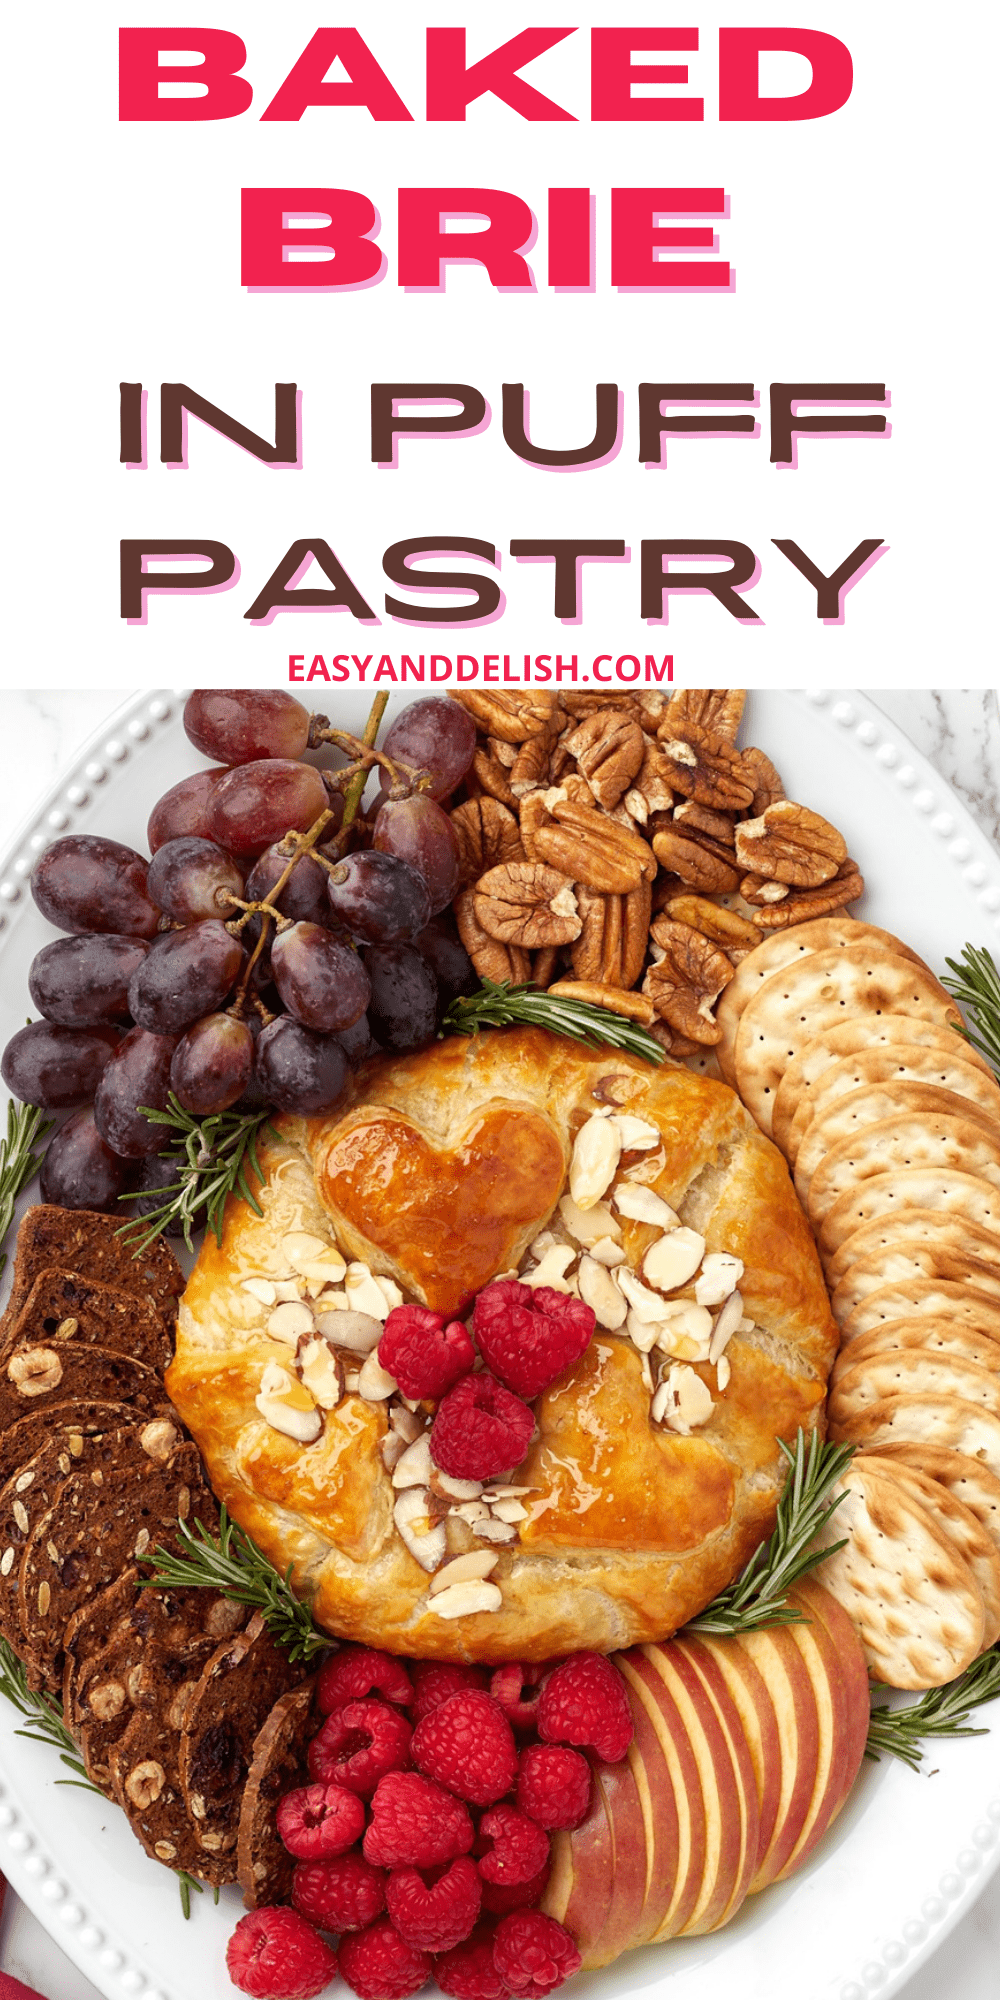 pin showing a platter with baked brie in puff pastry sorrounded by crackers, nuts, and fruits.